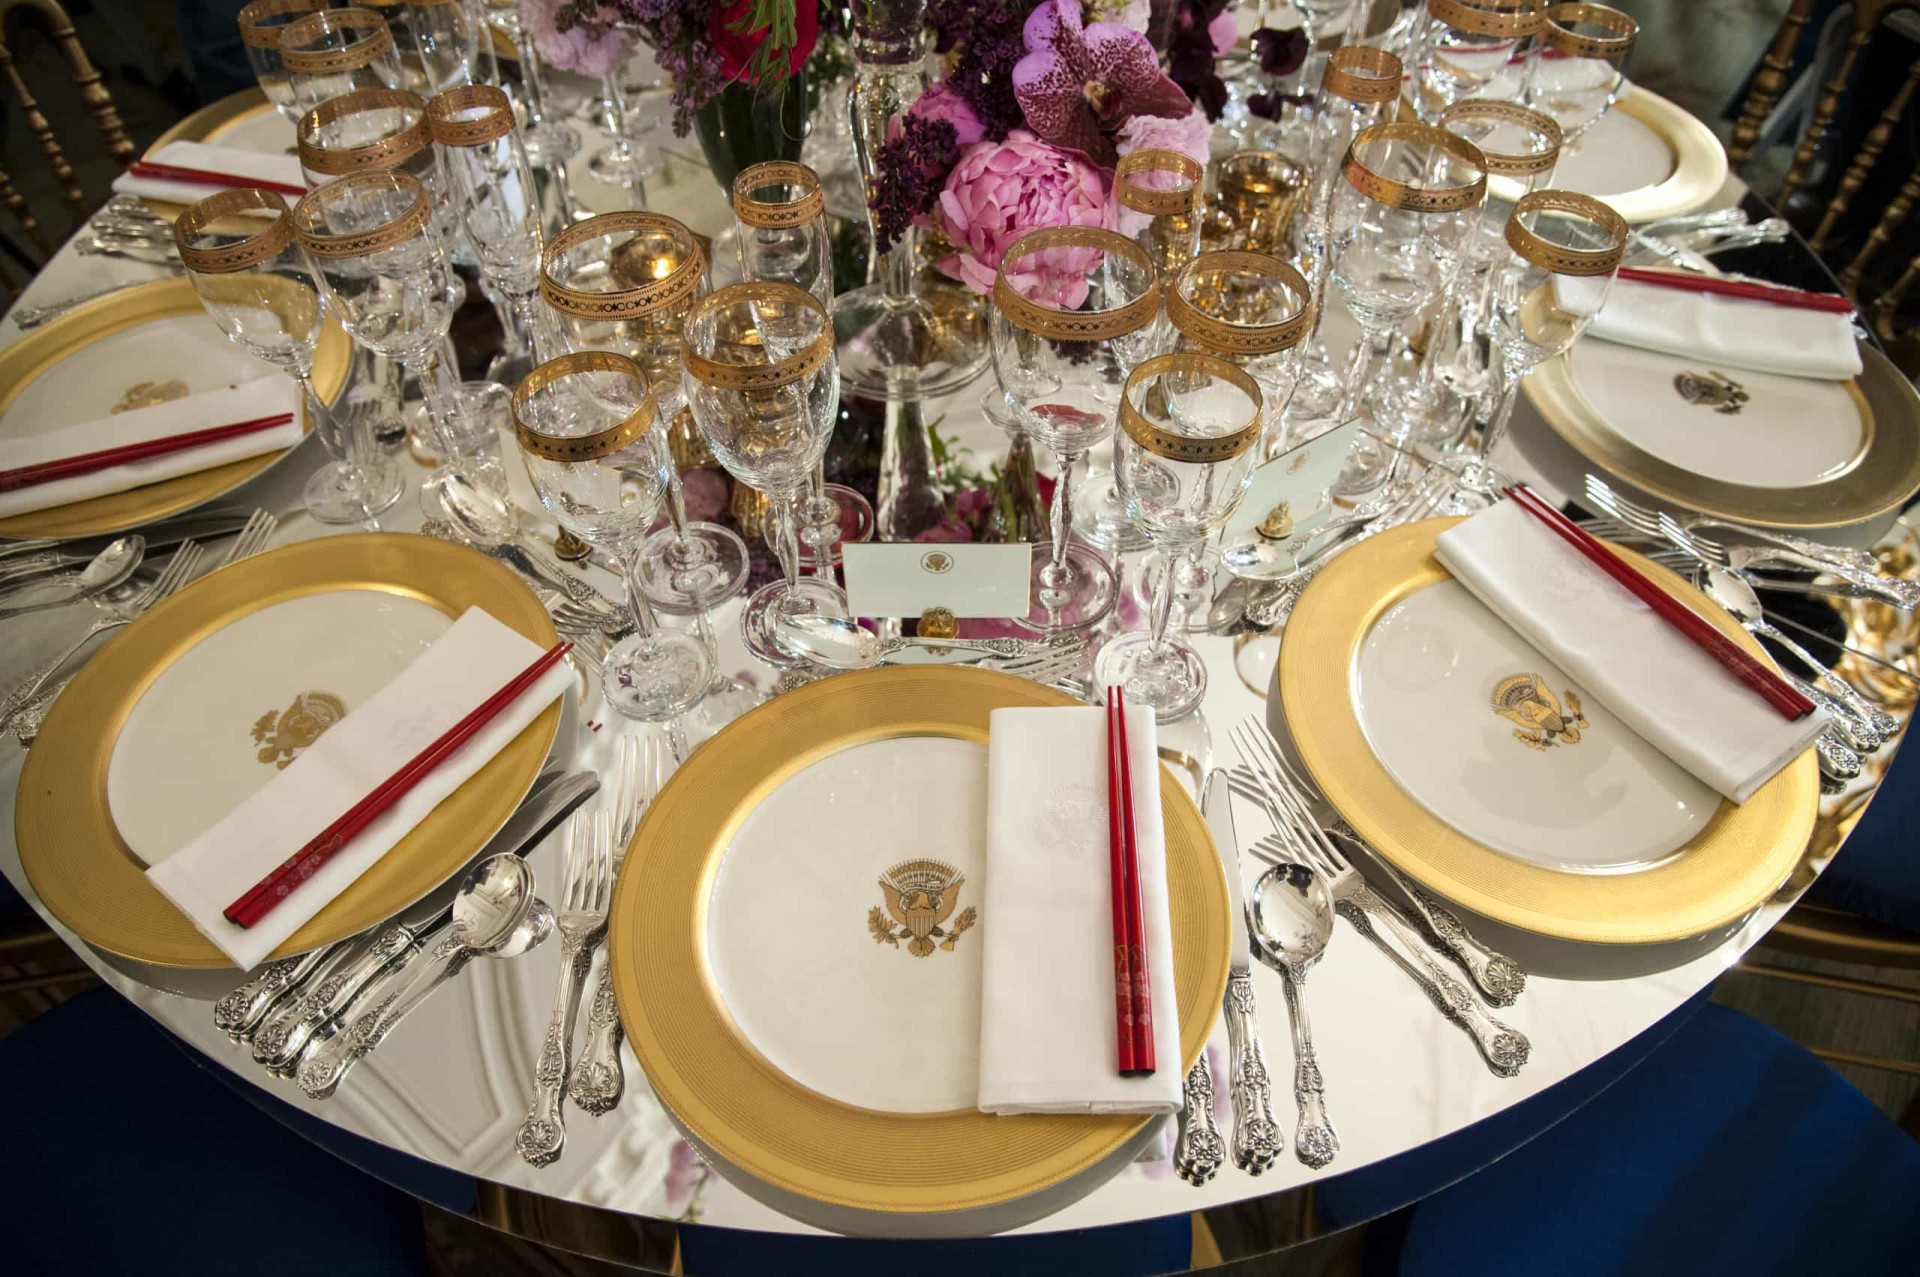 <p>First Lady Mary Todd Lincoln began the tradition. Pictured is the Obama State China Service.</p><p><a href="https://www.msn.com/en-us/community/channel/vid-7xx8mnucu55yw63we9va2gwr7uihbxwc68fxqp25x6tg4ftibpra?cvid=94631541bc0f4f89bfd59158d696ad7e">Follow us and access great exclusive content every day</a></p>